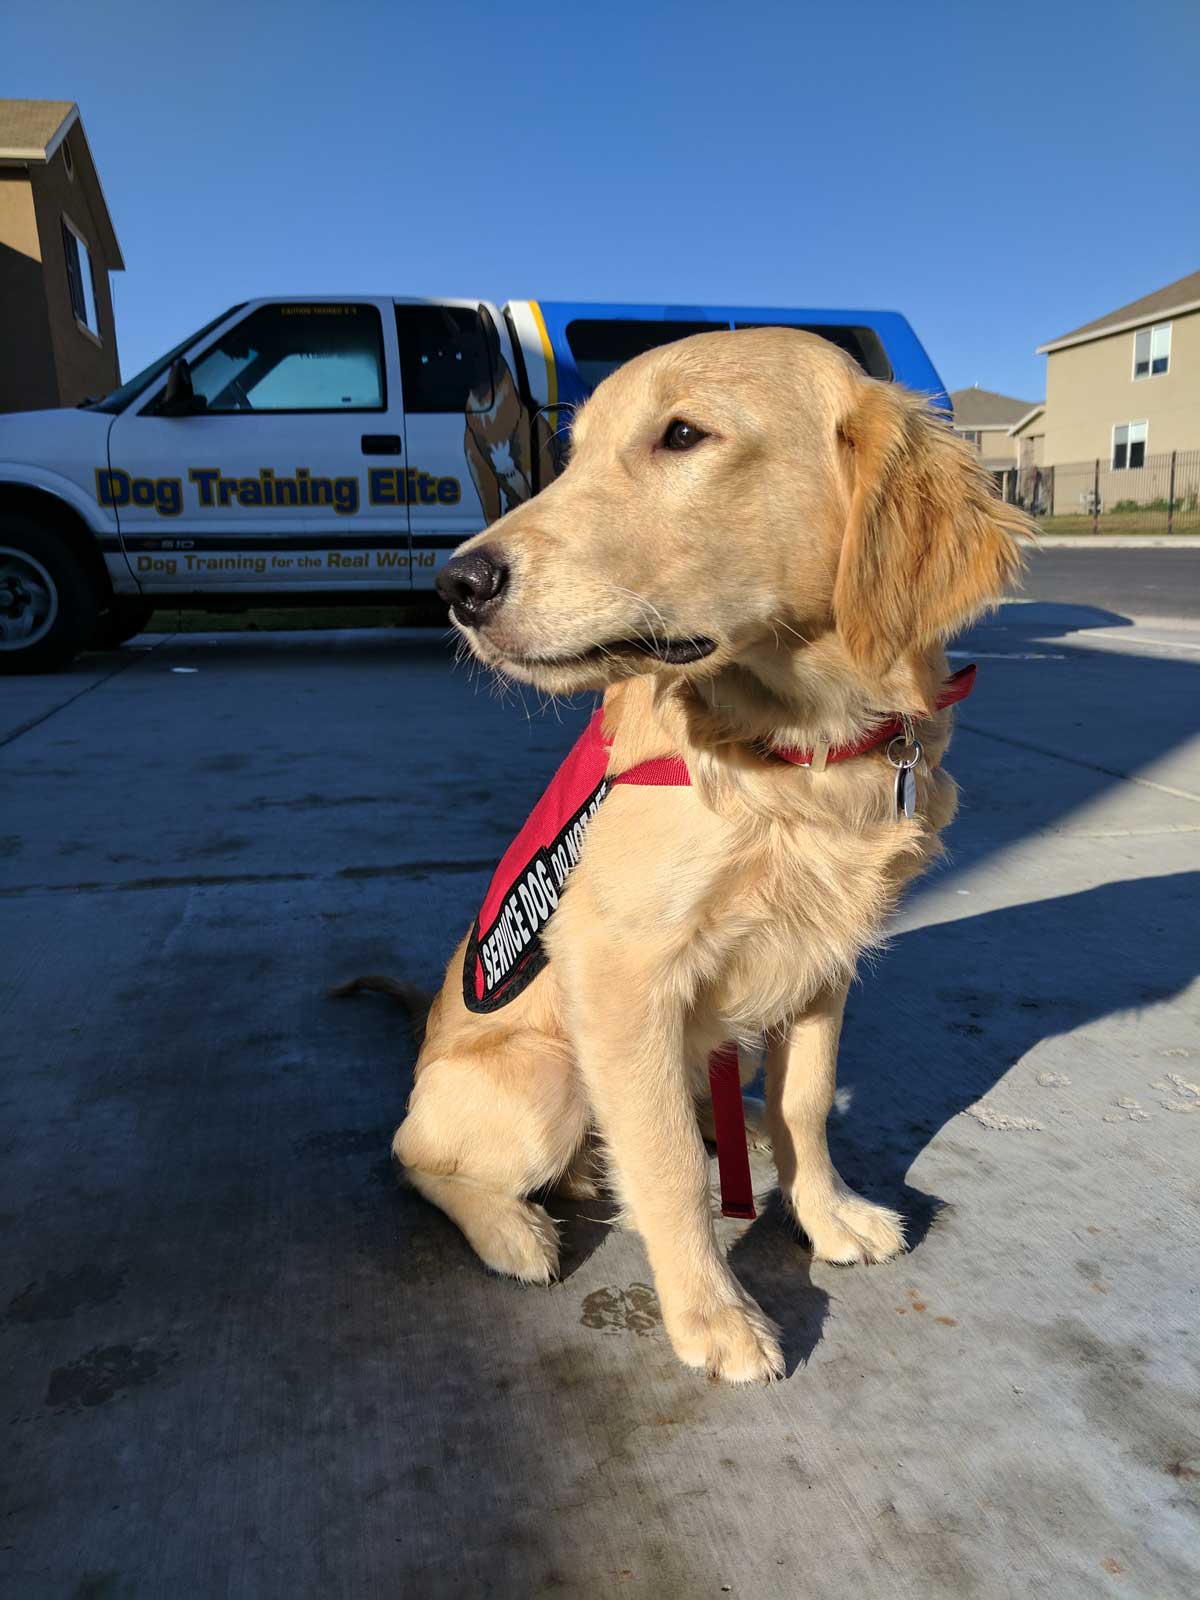 Dog Training Elite West Michigan is proud to have the highest rated service dog training programs near you in Grand Rapids.